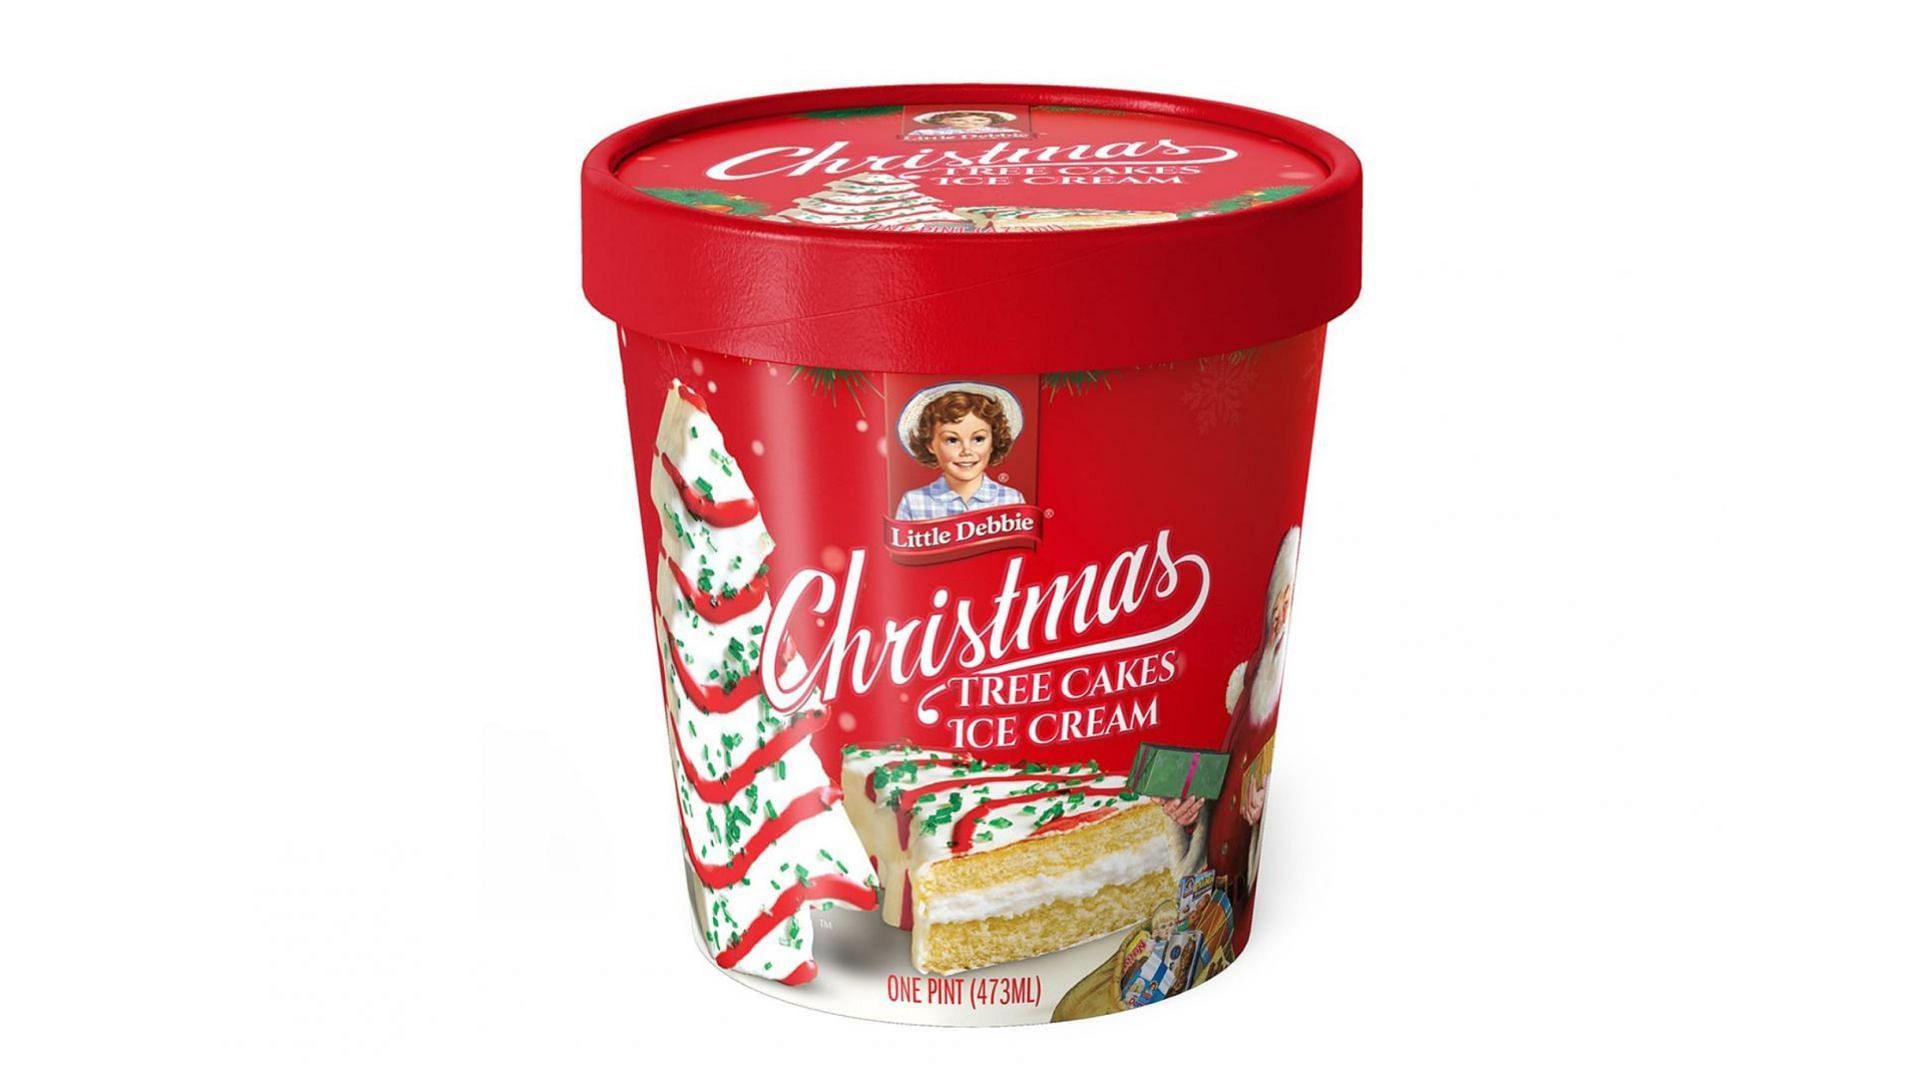 Christmas Tree Cake Ice Cream (Promotional Image by Little Debbie)